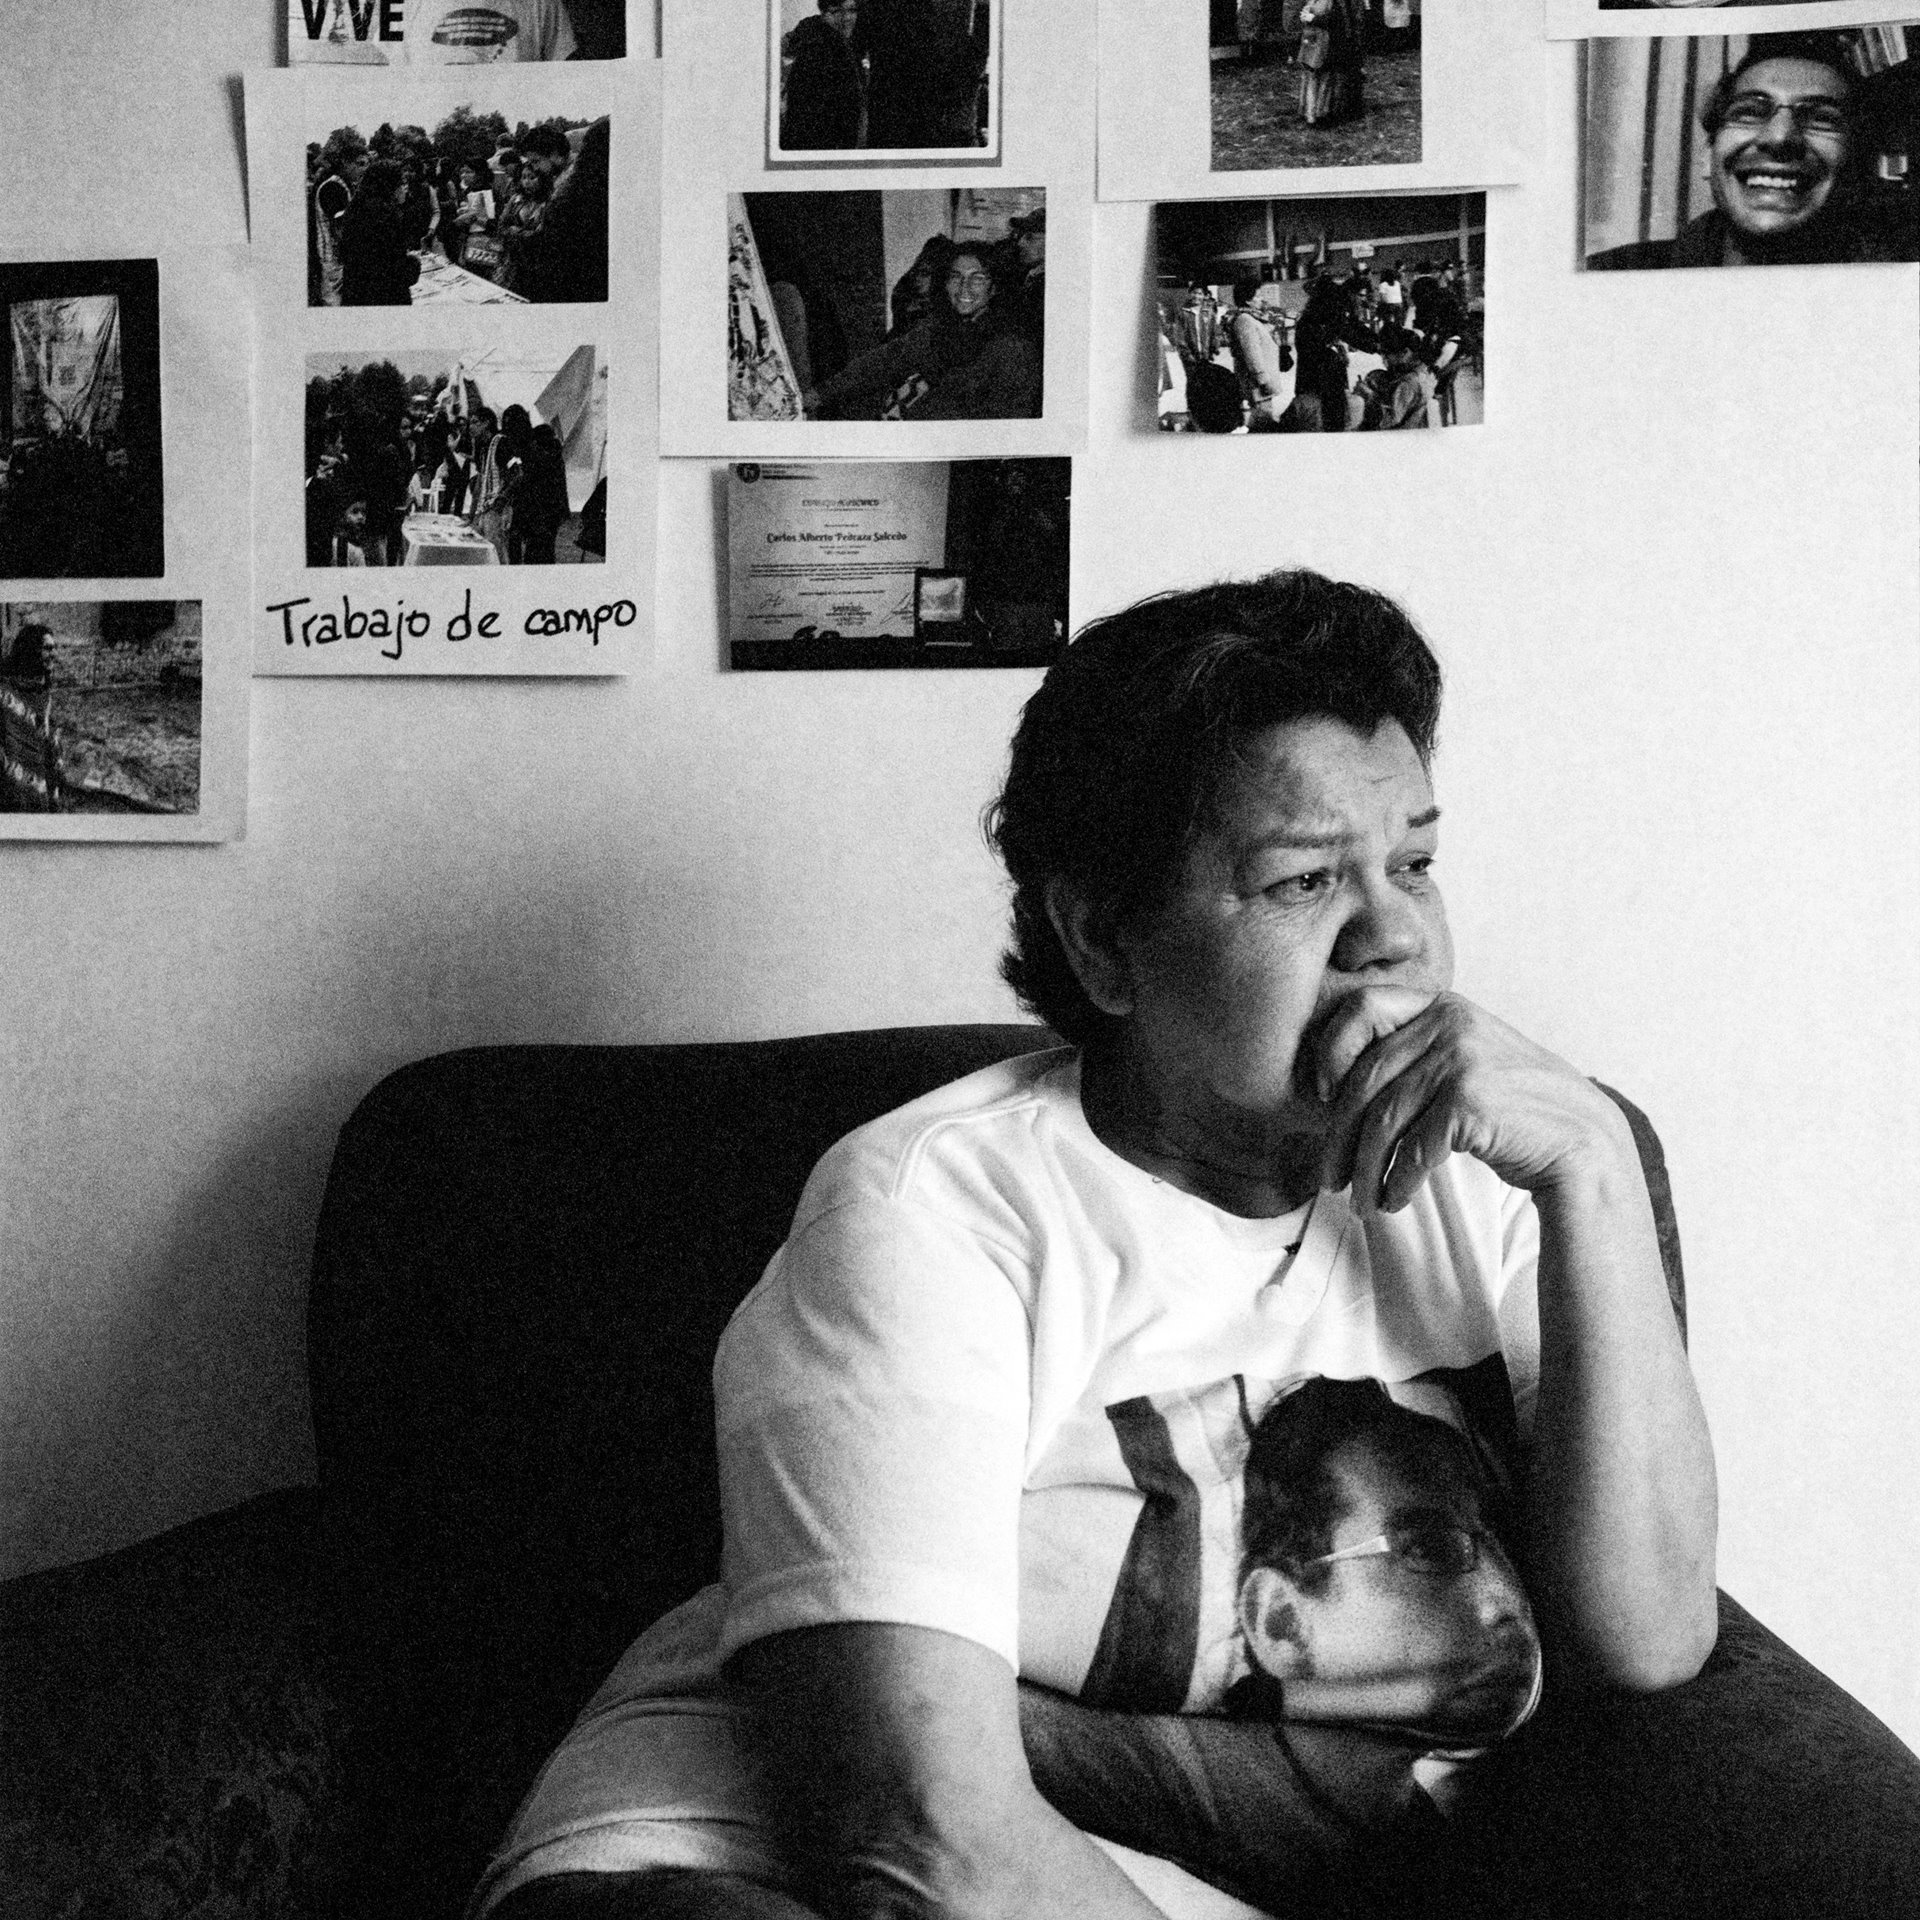 The mother of Carlos Alberto Pedraza Salcedo, who was disappeared in Bogotá on 19 January 2015, sits in the living room of her home in Bogotá, Colombia. She wears a T-shirt bearing his image, and has photographs of her son on the wall. Pedraza was found dead, with a gunshot wound to the head, in a nearby municipality two days after he disappeared. A student leader, he had been investigating &#39;false positives&#39; (extrajudicial executions committed by the Colombian security forces) on behalf of the National Movement of Victims of State Crimes (MOVICE).